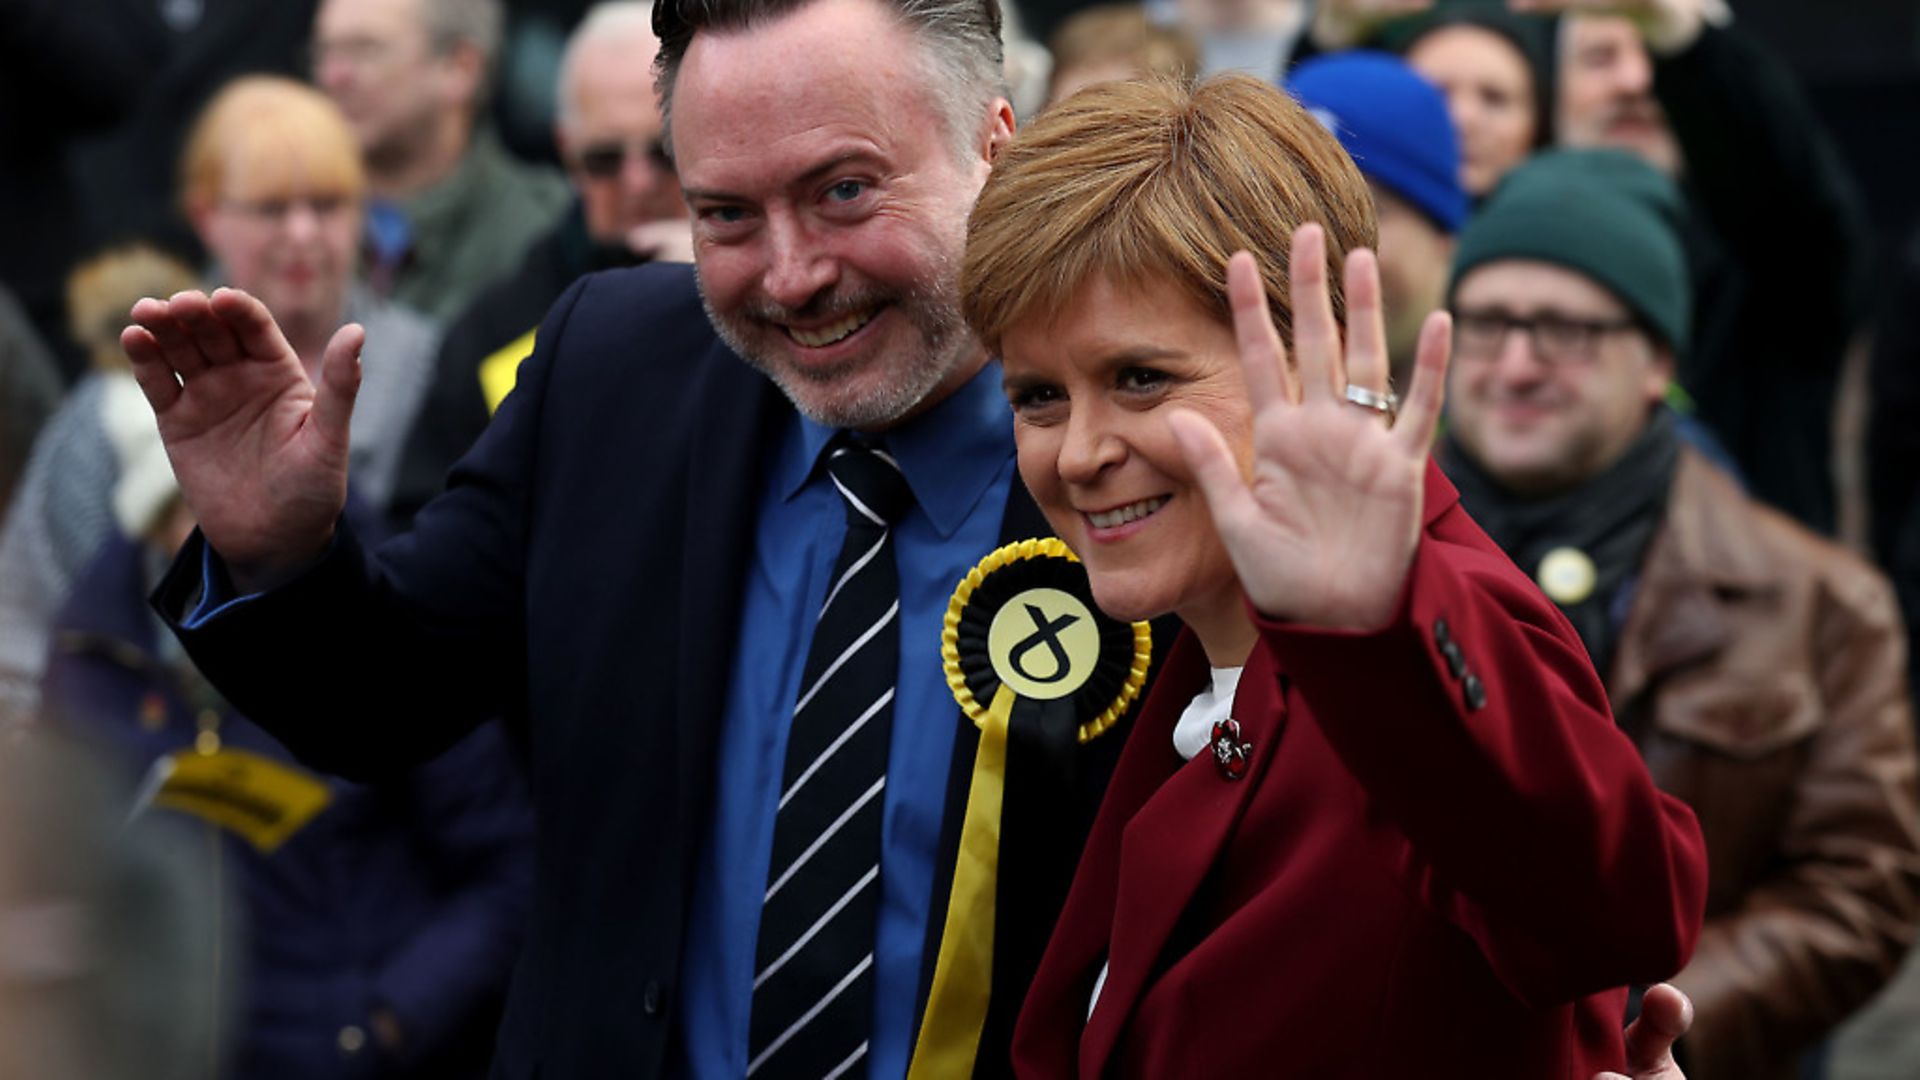 SNP leader Nicola Sturgeon joins Alyn Smith, the SNP's candidate for Stirling, on the general election campaign trail. Photograph: Andrew Milligan/PA Wire. - Credit: PA